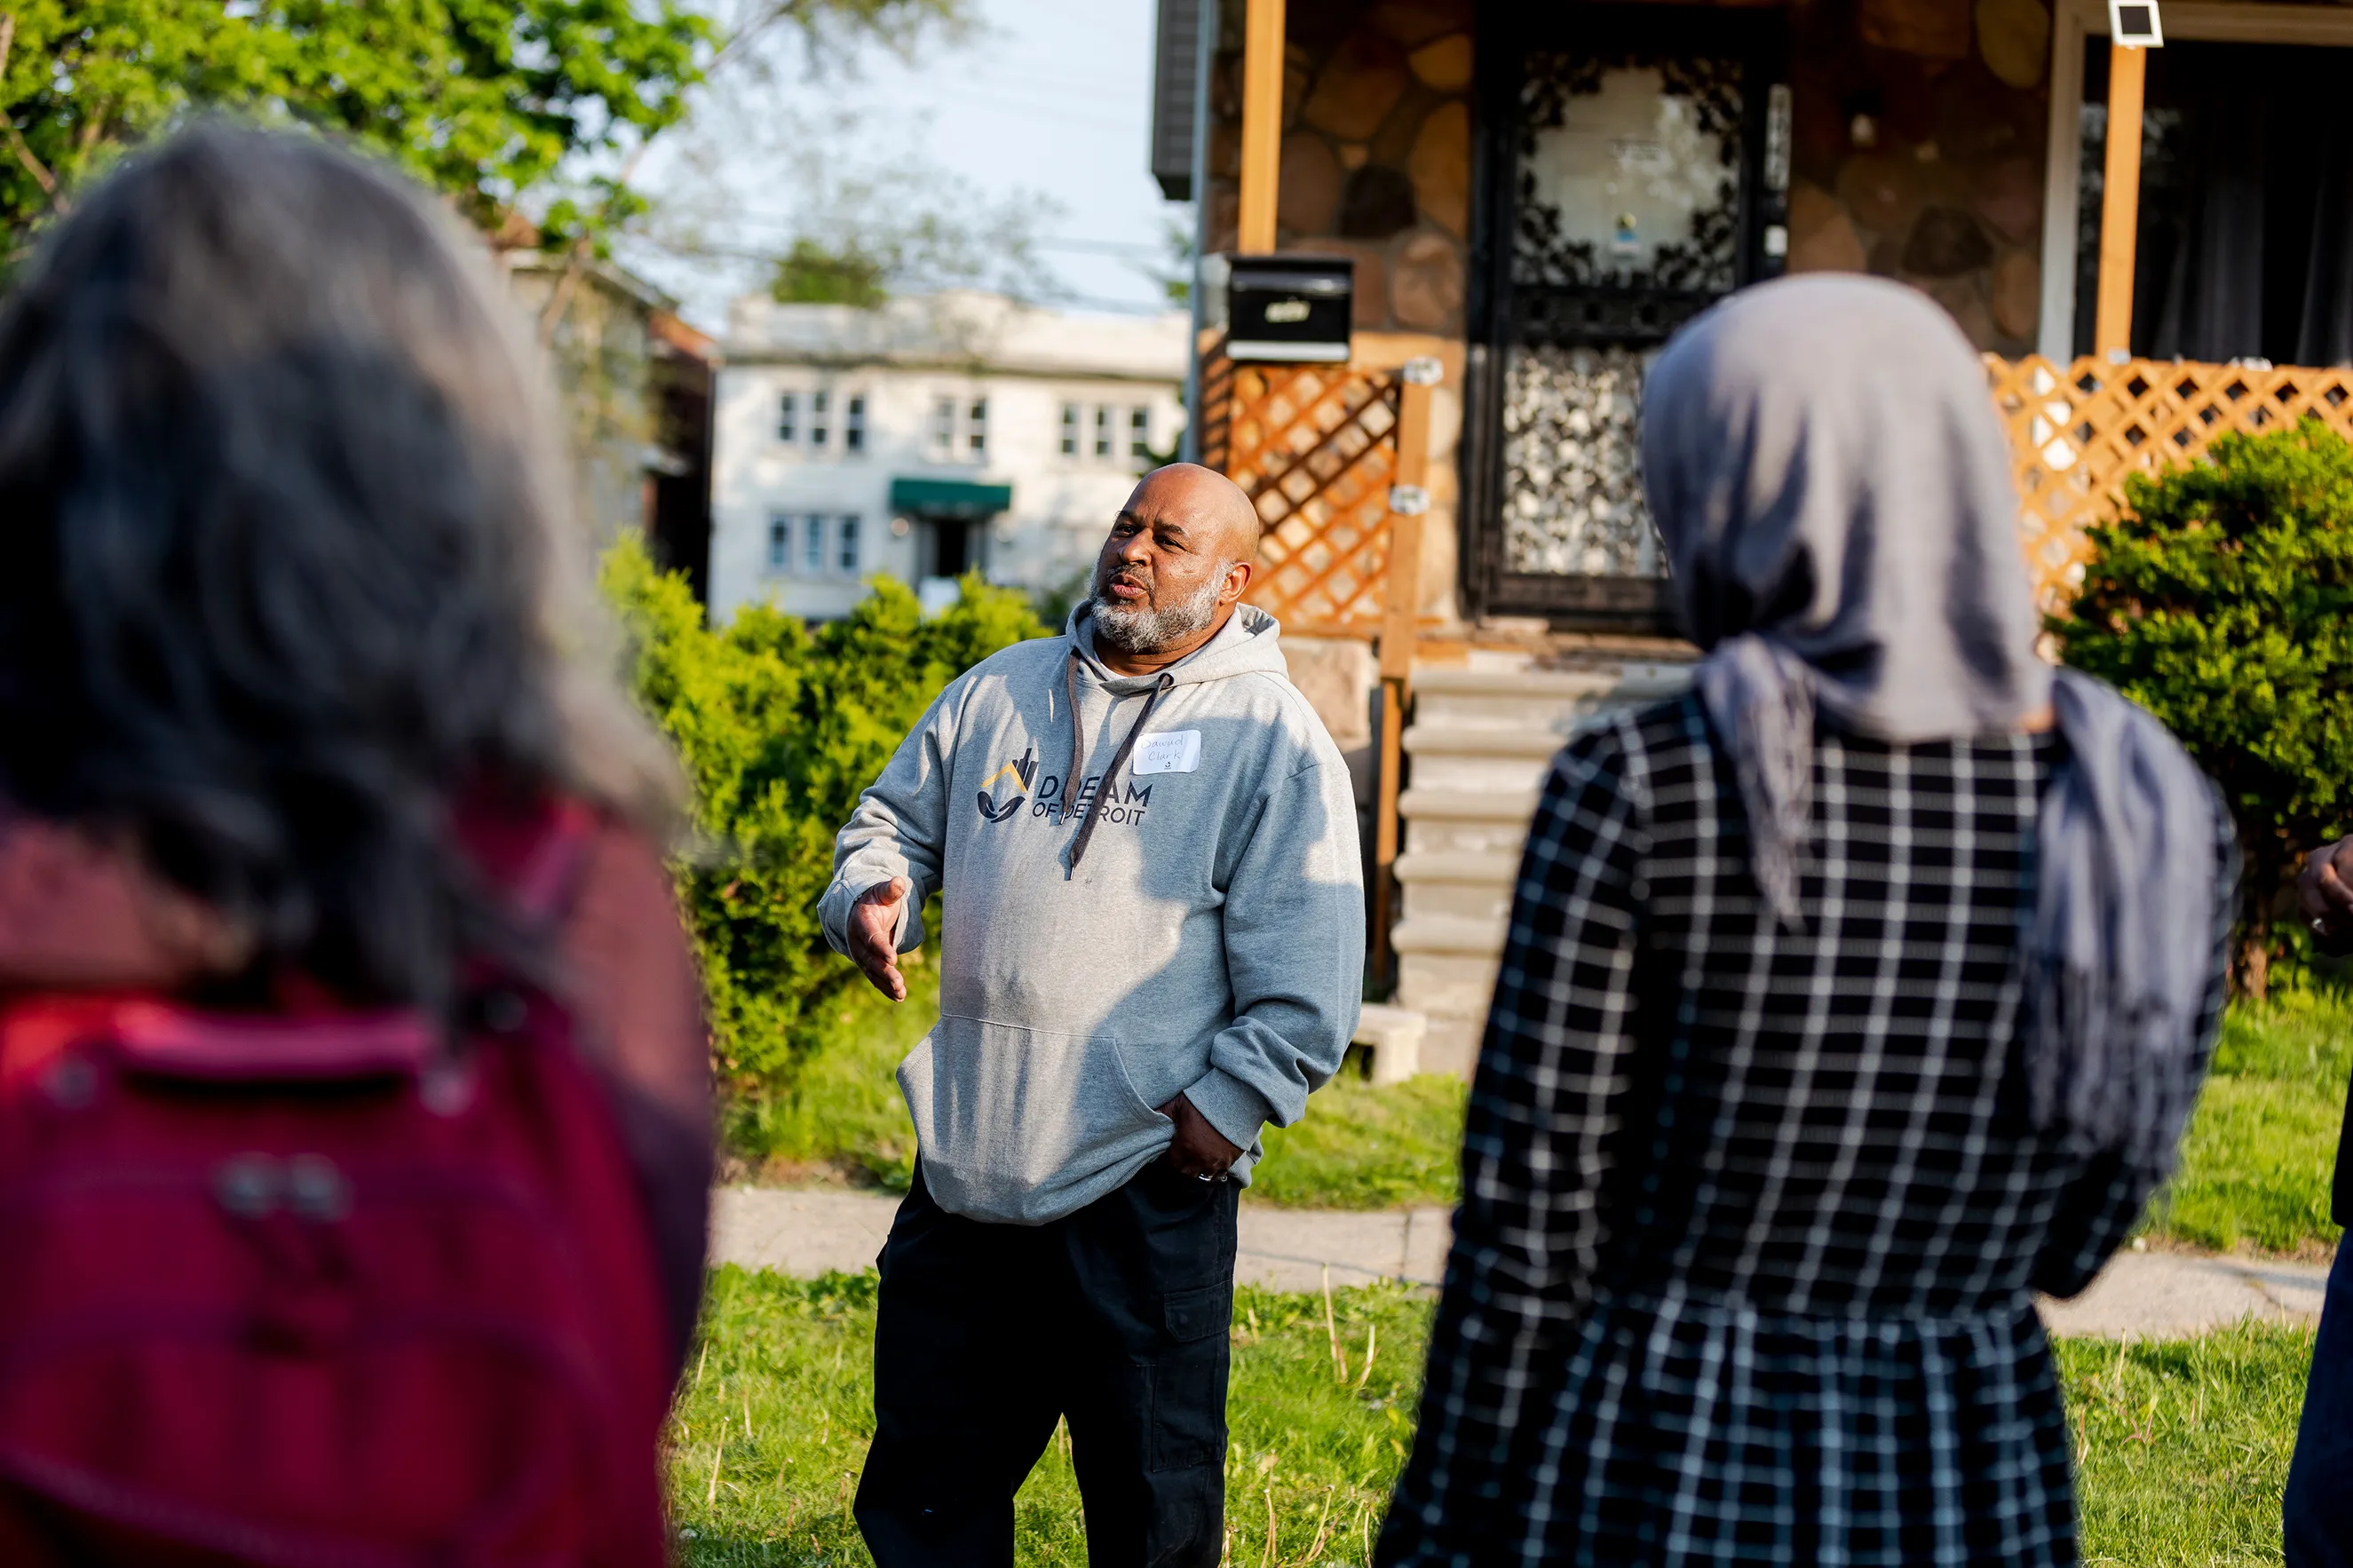 A dark skinned man wearing a gray sweatshirt is speaking to two people in front of a house with a brown porch.